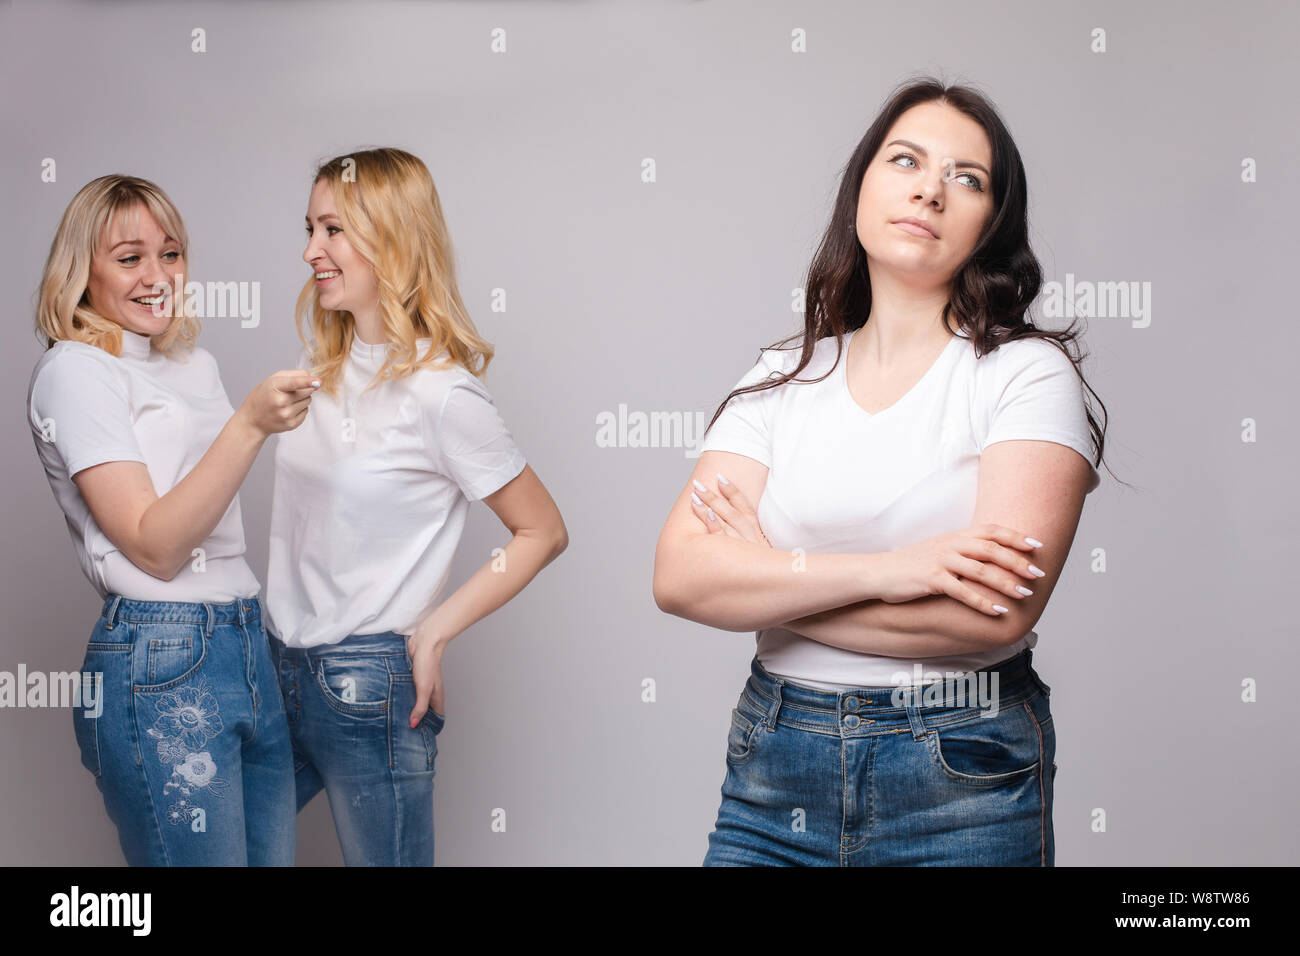 Offended brunette and two blondes gossiping behind Stock Photo